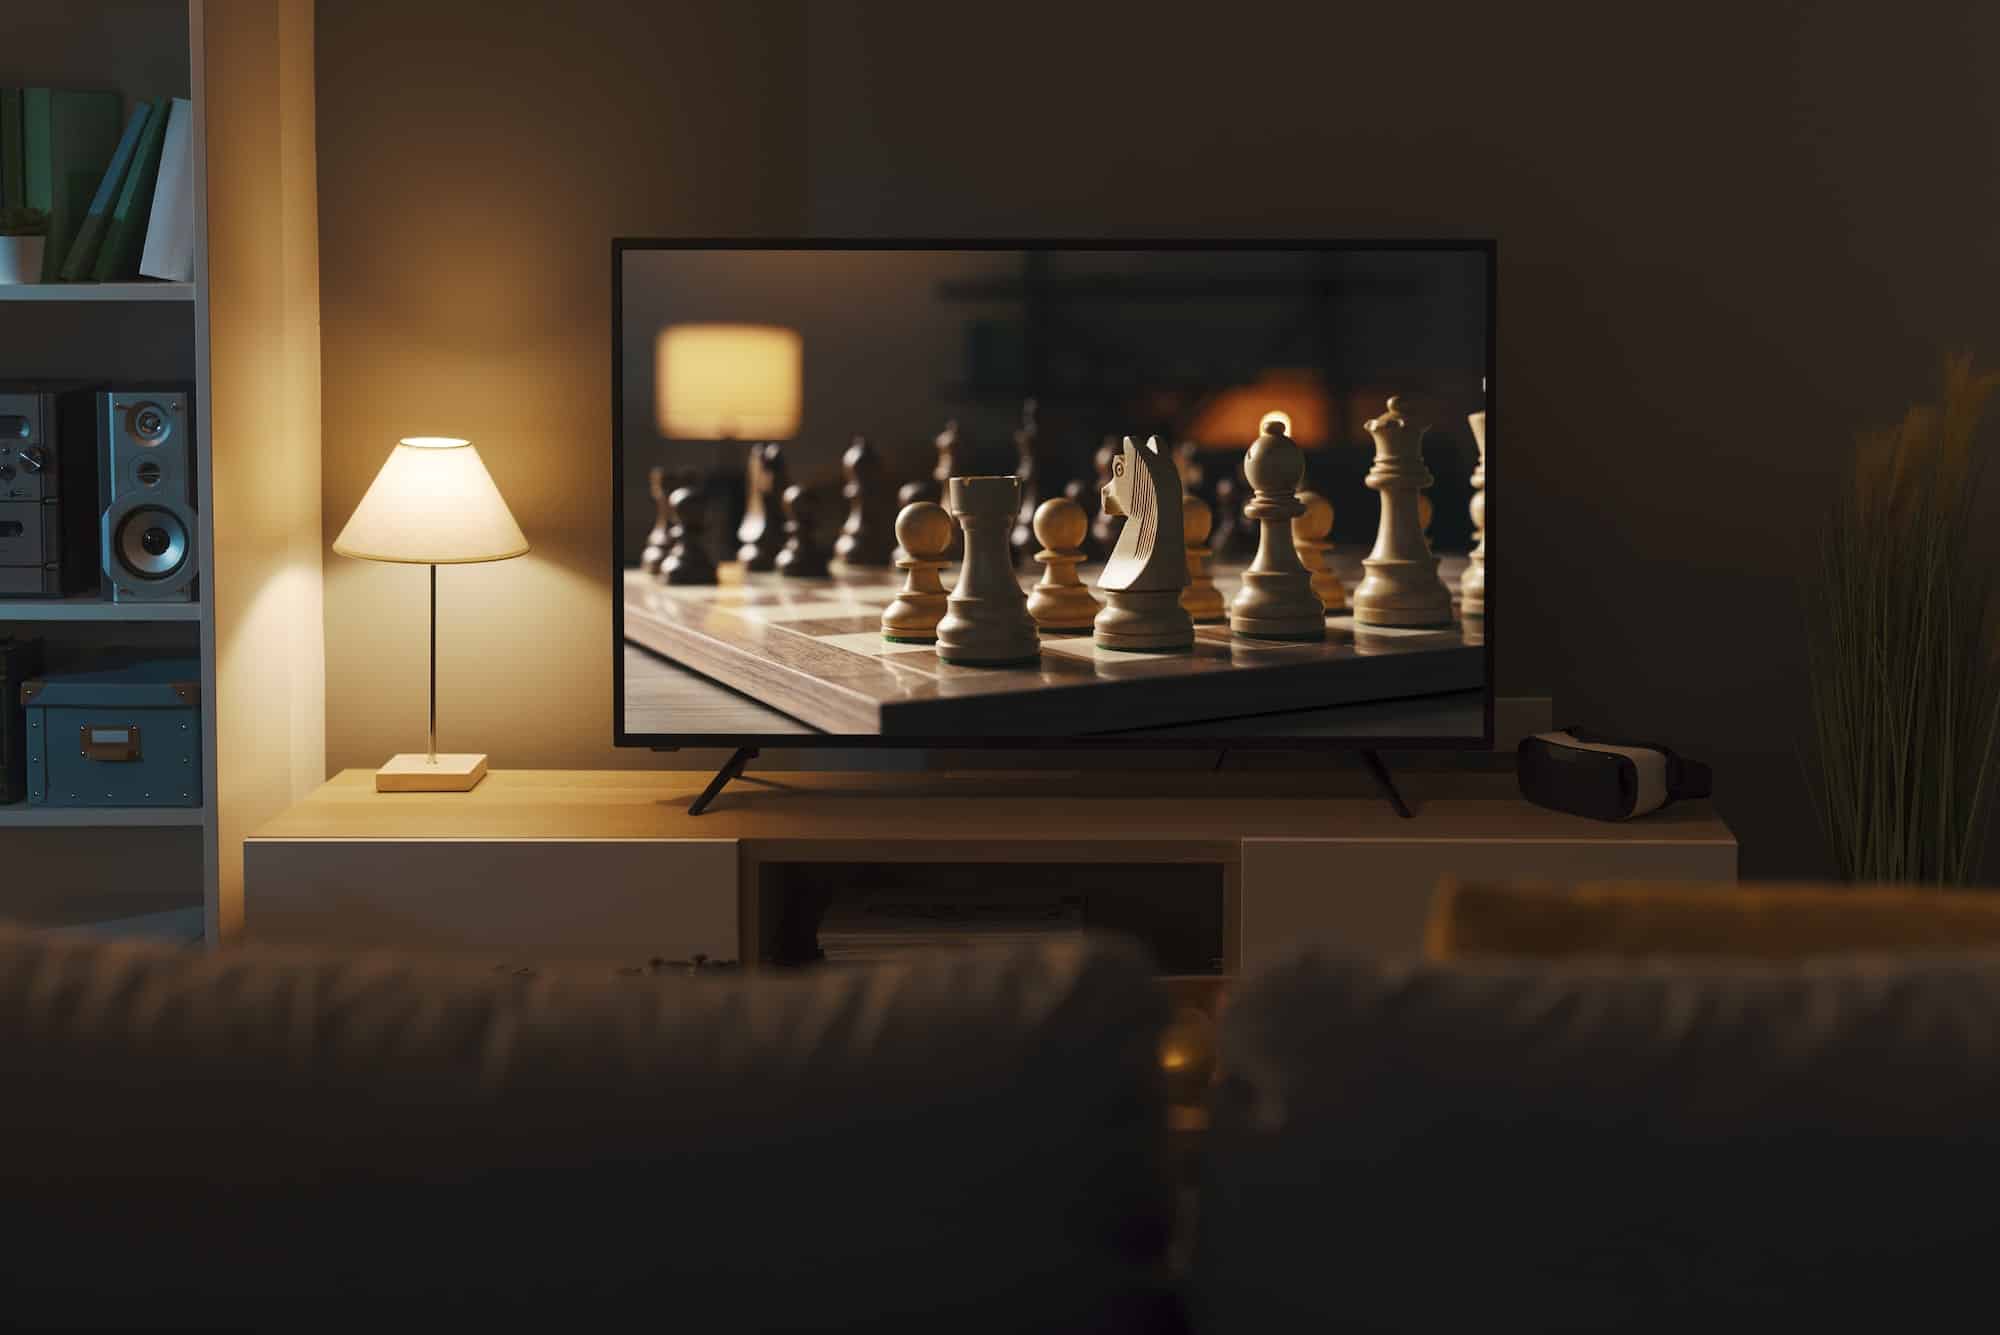 Chess game on a widescreen television